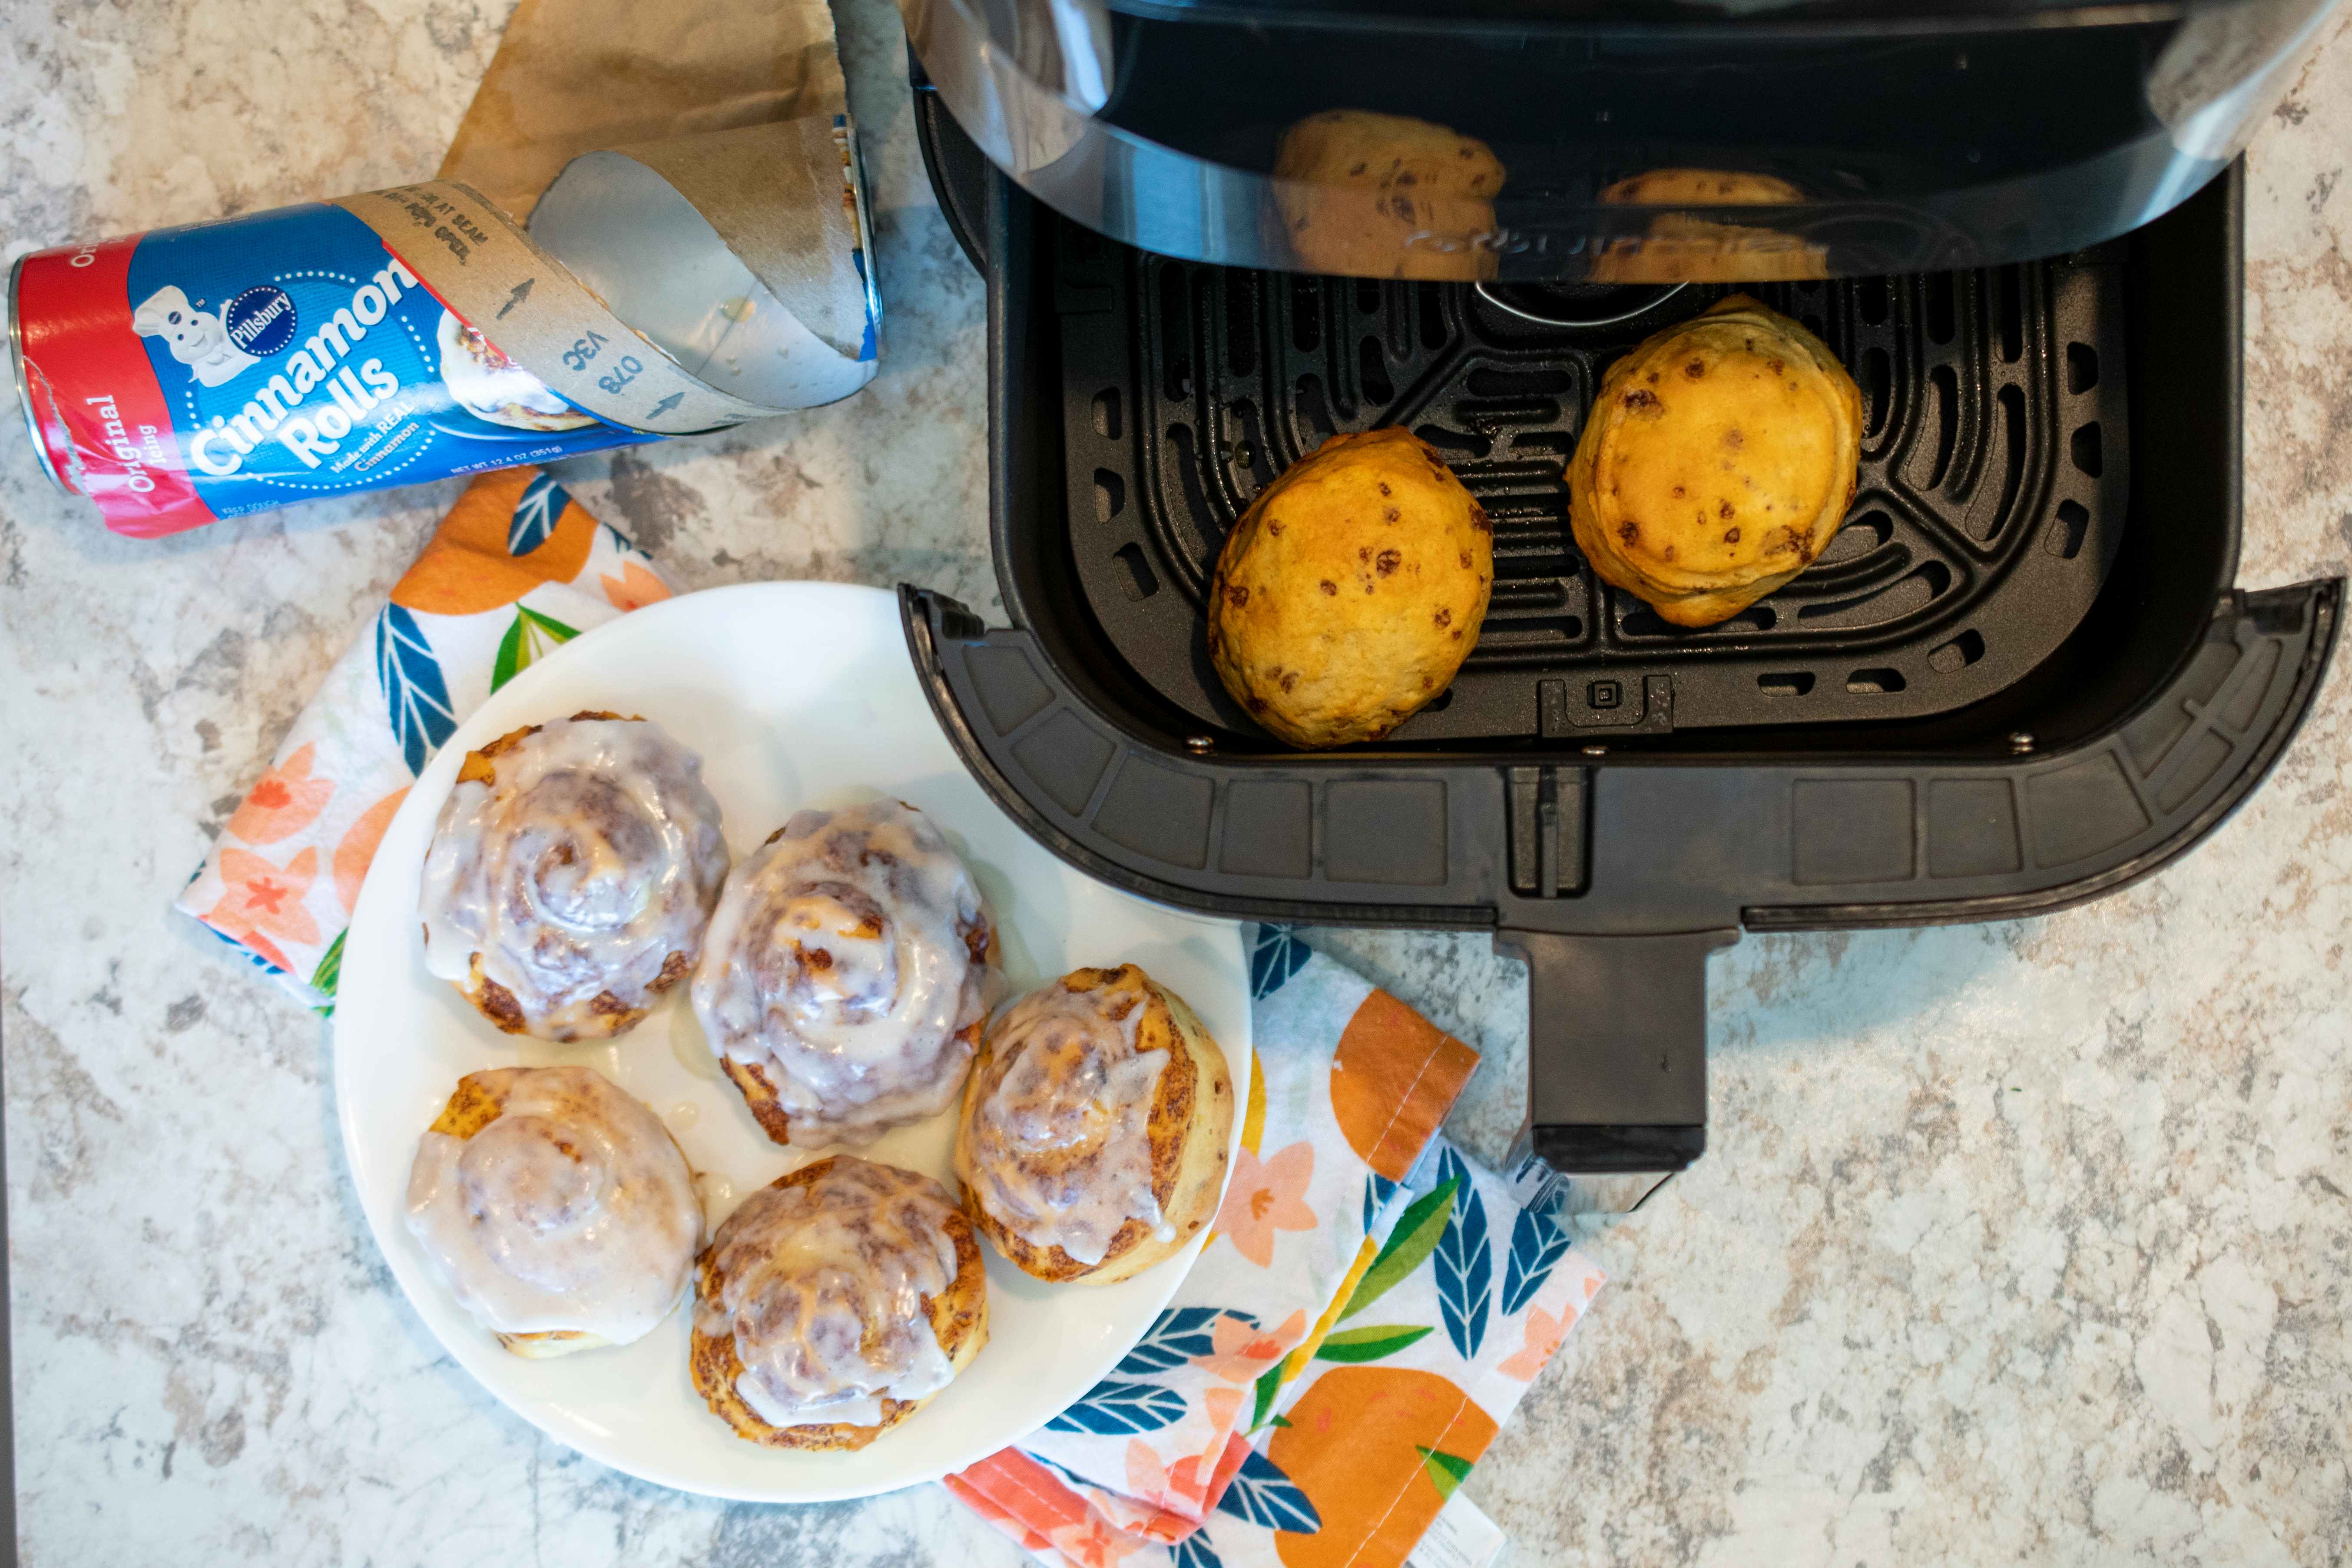 Recipe This  Food Ideas For Toddlers: 10 Airfryer Toddler Recipe